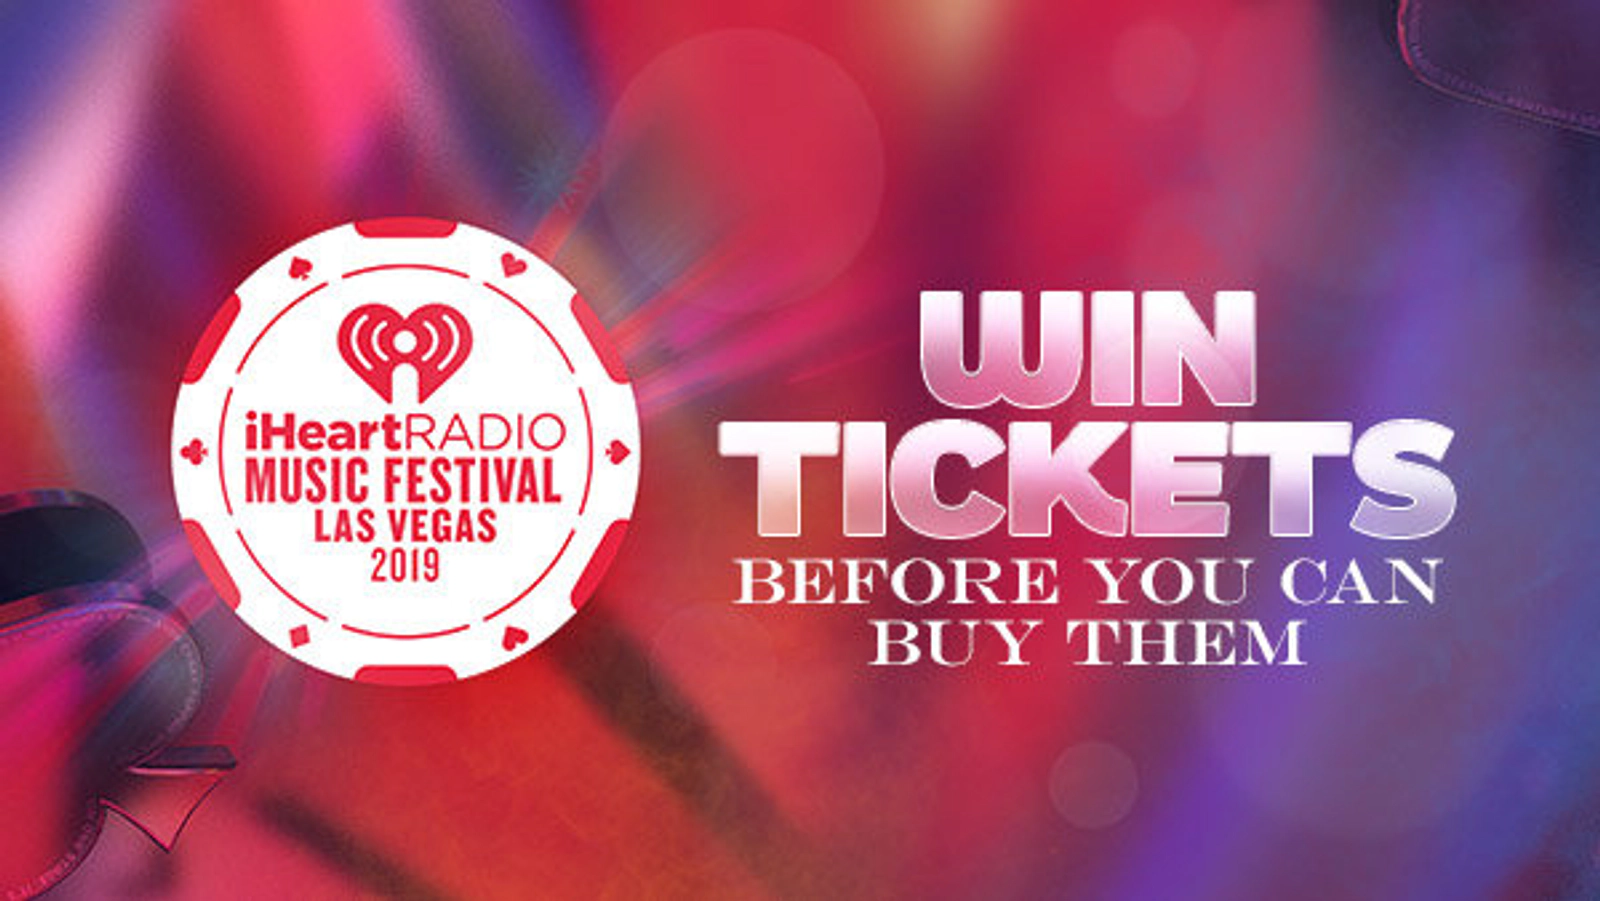 Listen to Win Tickets to Our iHeartRadio Music Festival Before You Can Buy Them! - Thumbnail Image